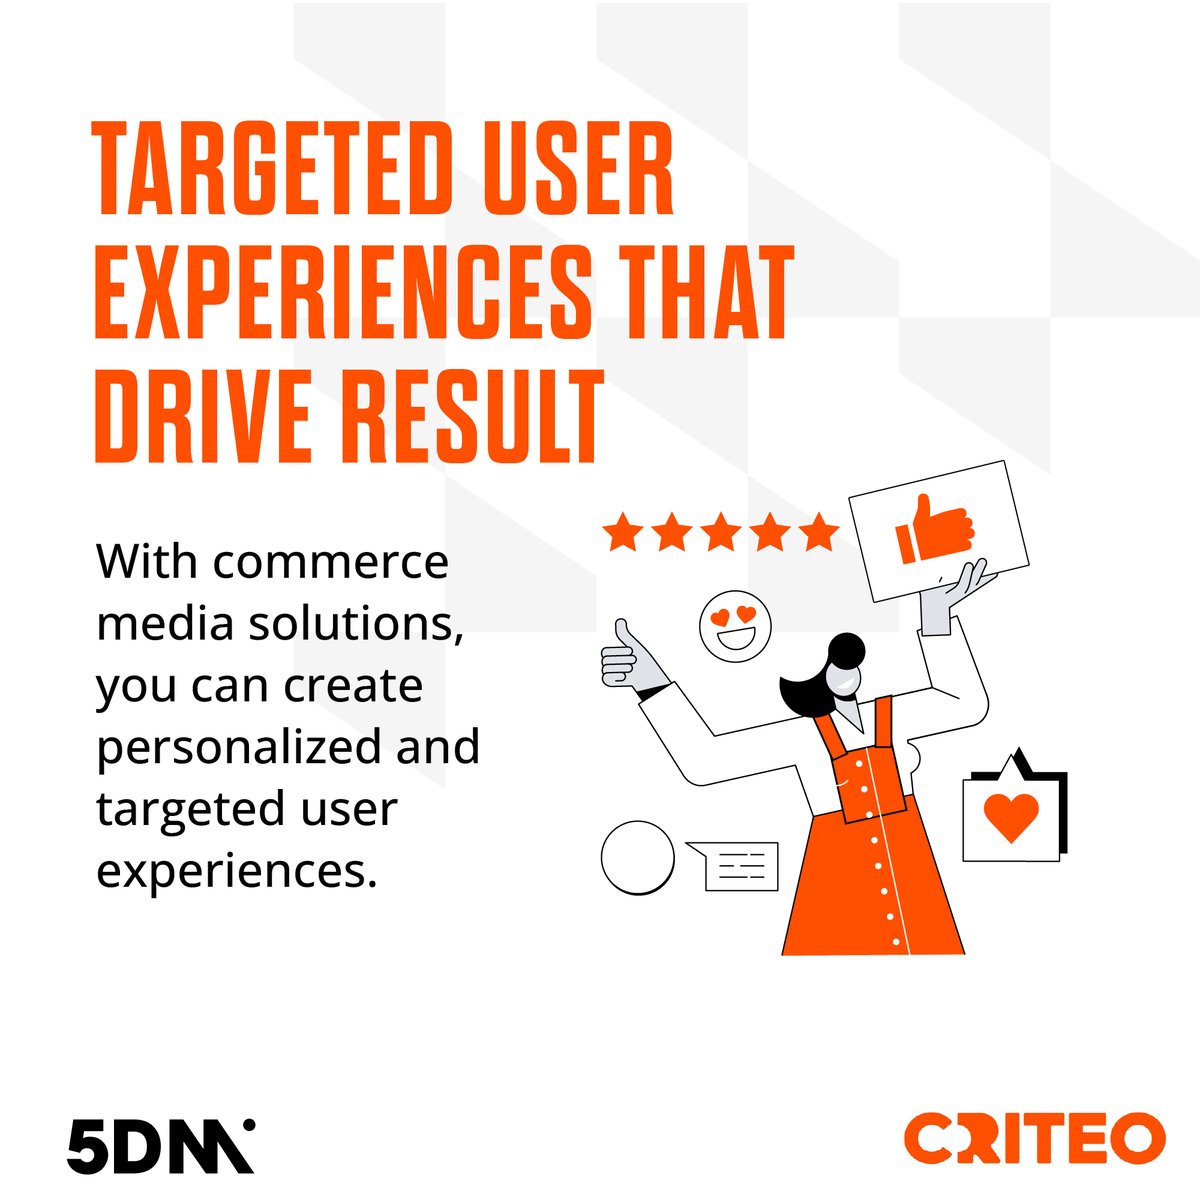 Commerce media is the future of digital marketing, revolutionizing the way businesses connect with consumers. Sign up for our webinar in partnership with @criteo through the link below to learn more! Link:forms.gle/NE6TRUGAnT6Fo1…